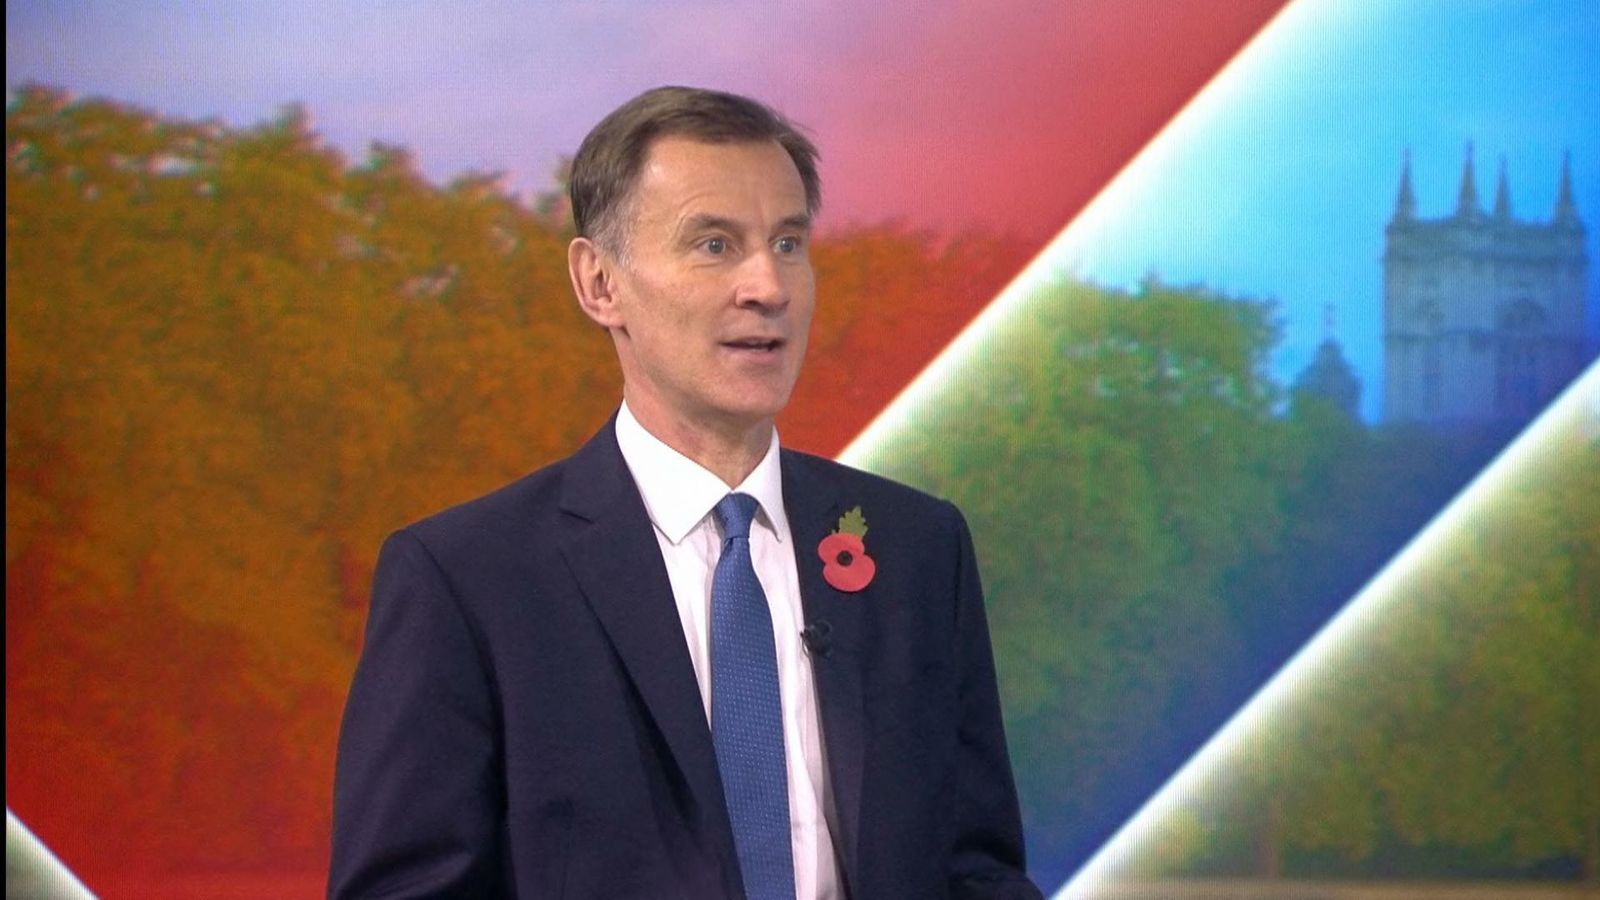 Sophy Ridge on Sunday: Jeremy Hunt says everyone will have to pay higher taxes - but richest will make larger sacrifices